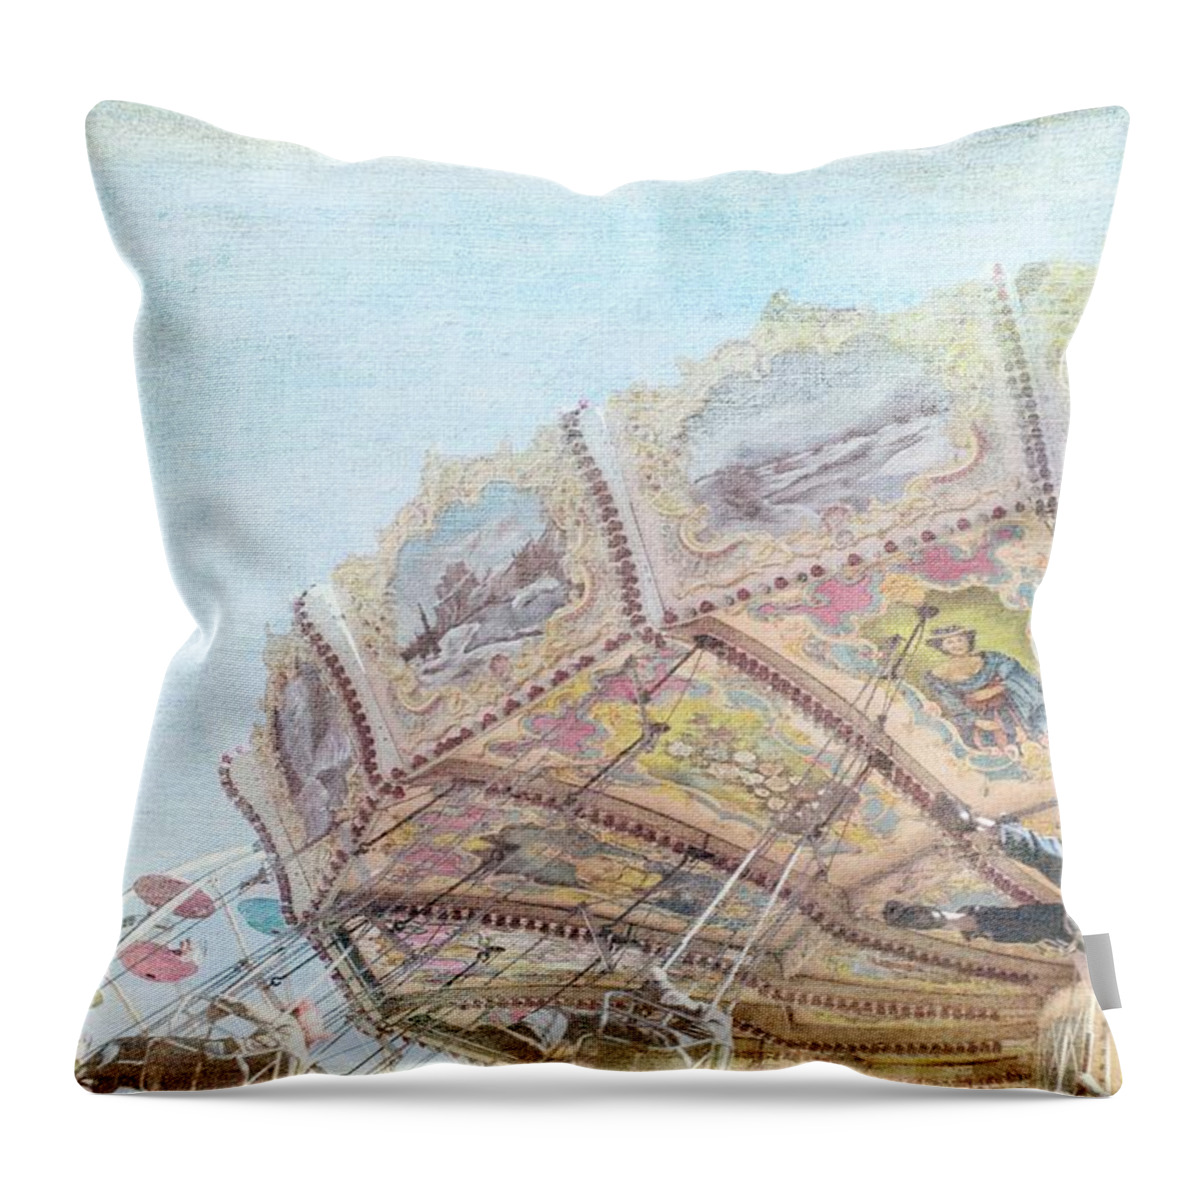 Carnival Swing Ride Throw Pillow featuring the photograph Carnival Swing Ride by Melissa Bittinger